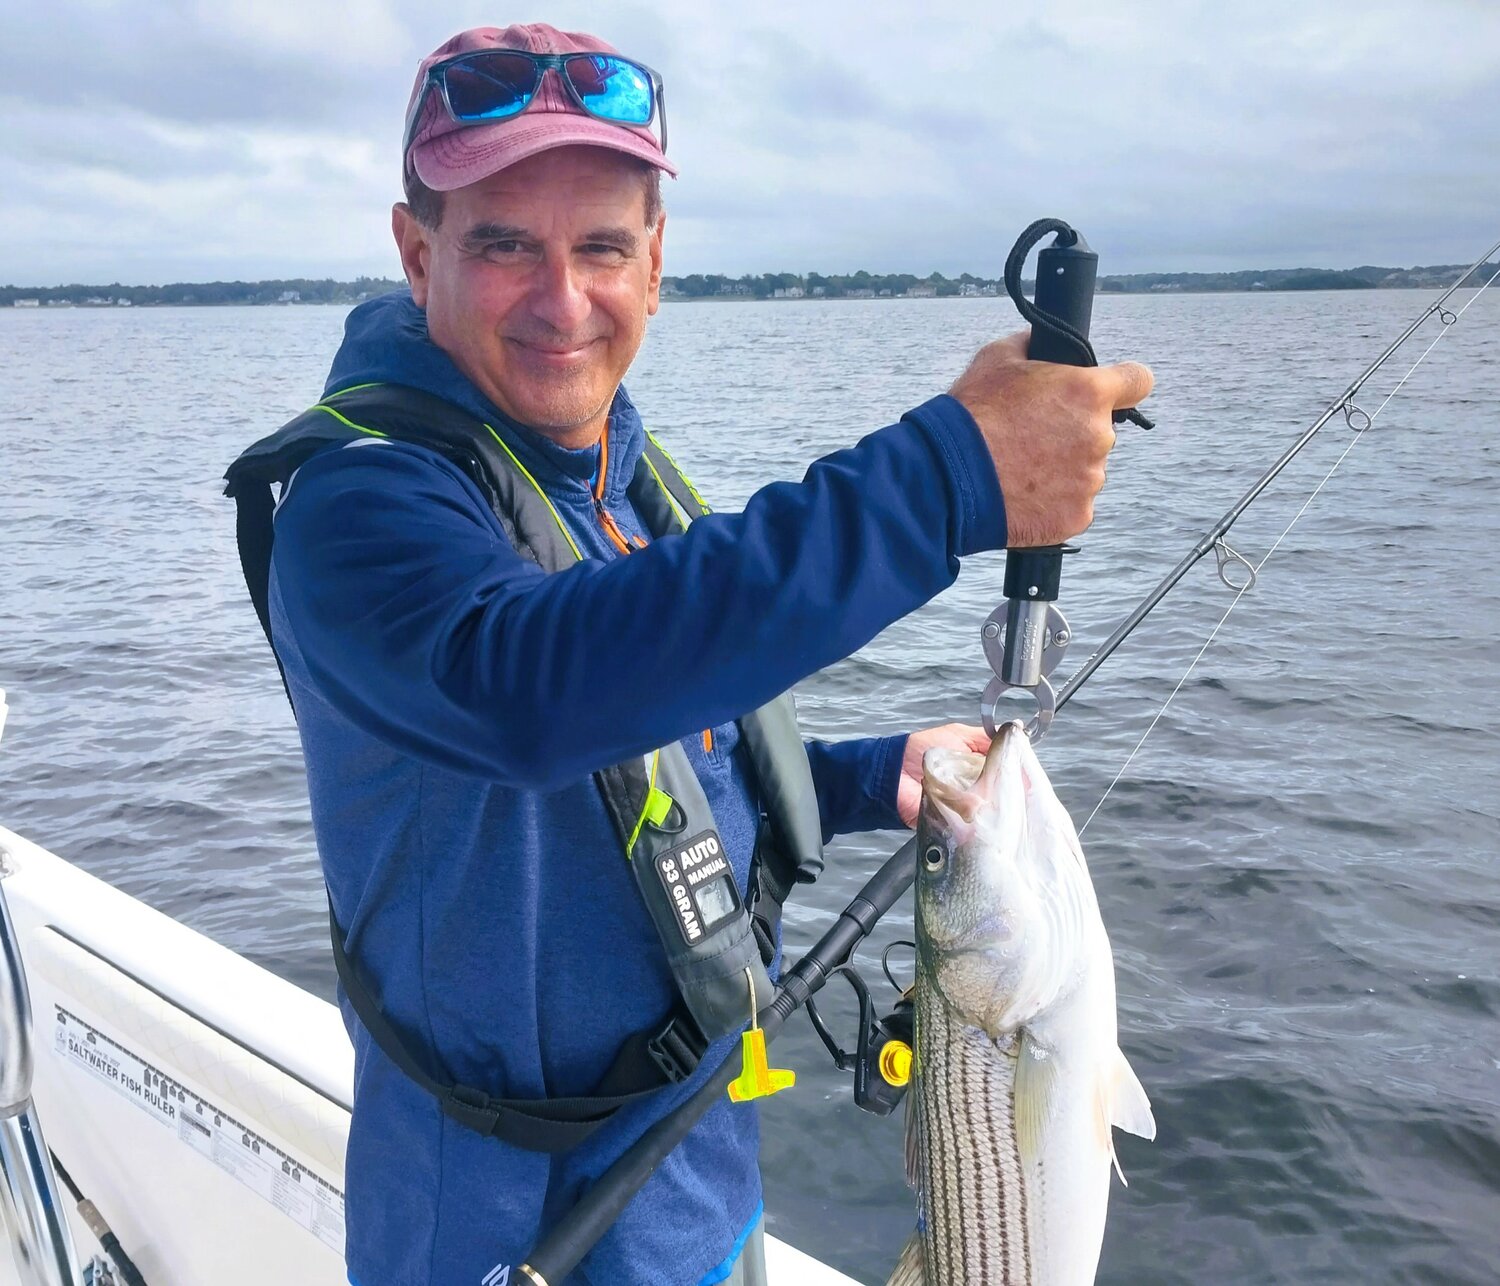 Joe Rochira of Warwick, with one of the three striped bass he caught this weekend trolling tube & worm on the east side of the shipping channel in front of Barrington Beach.